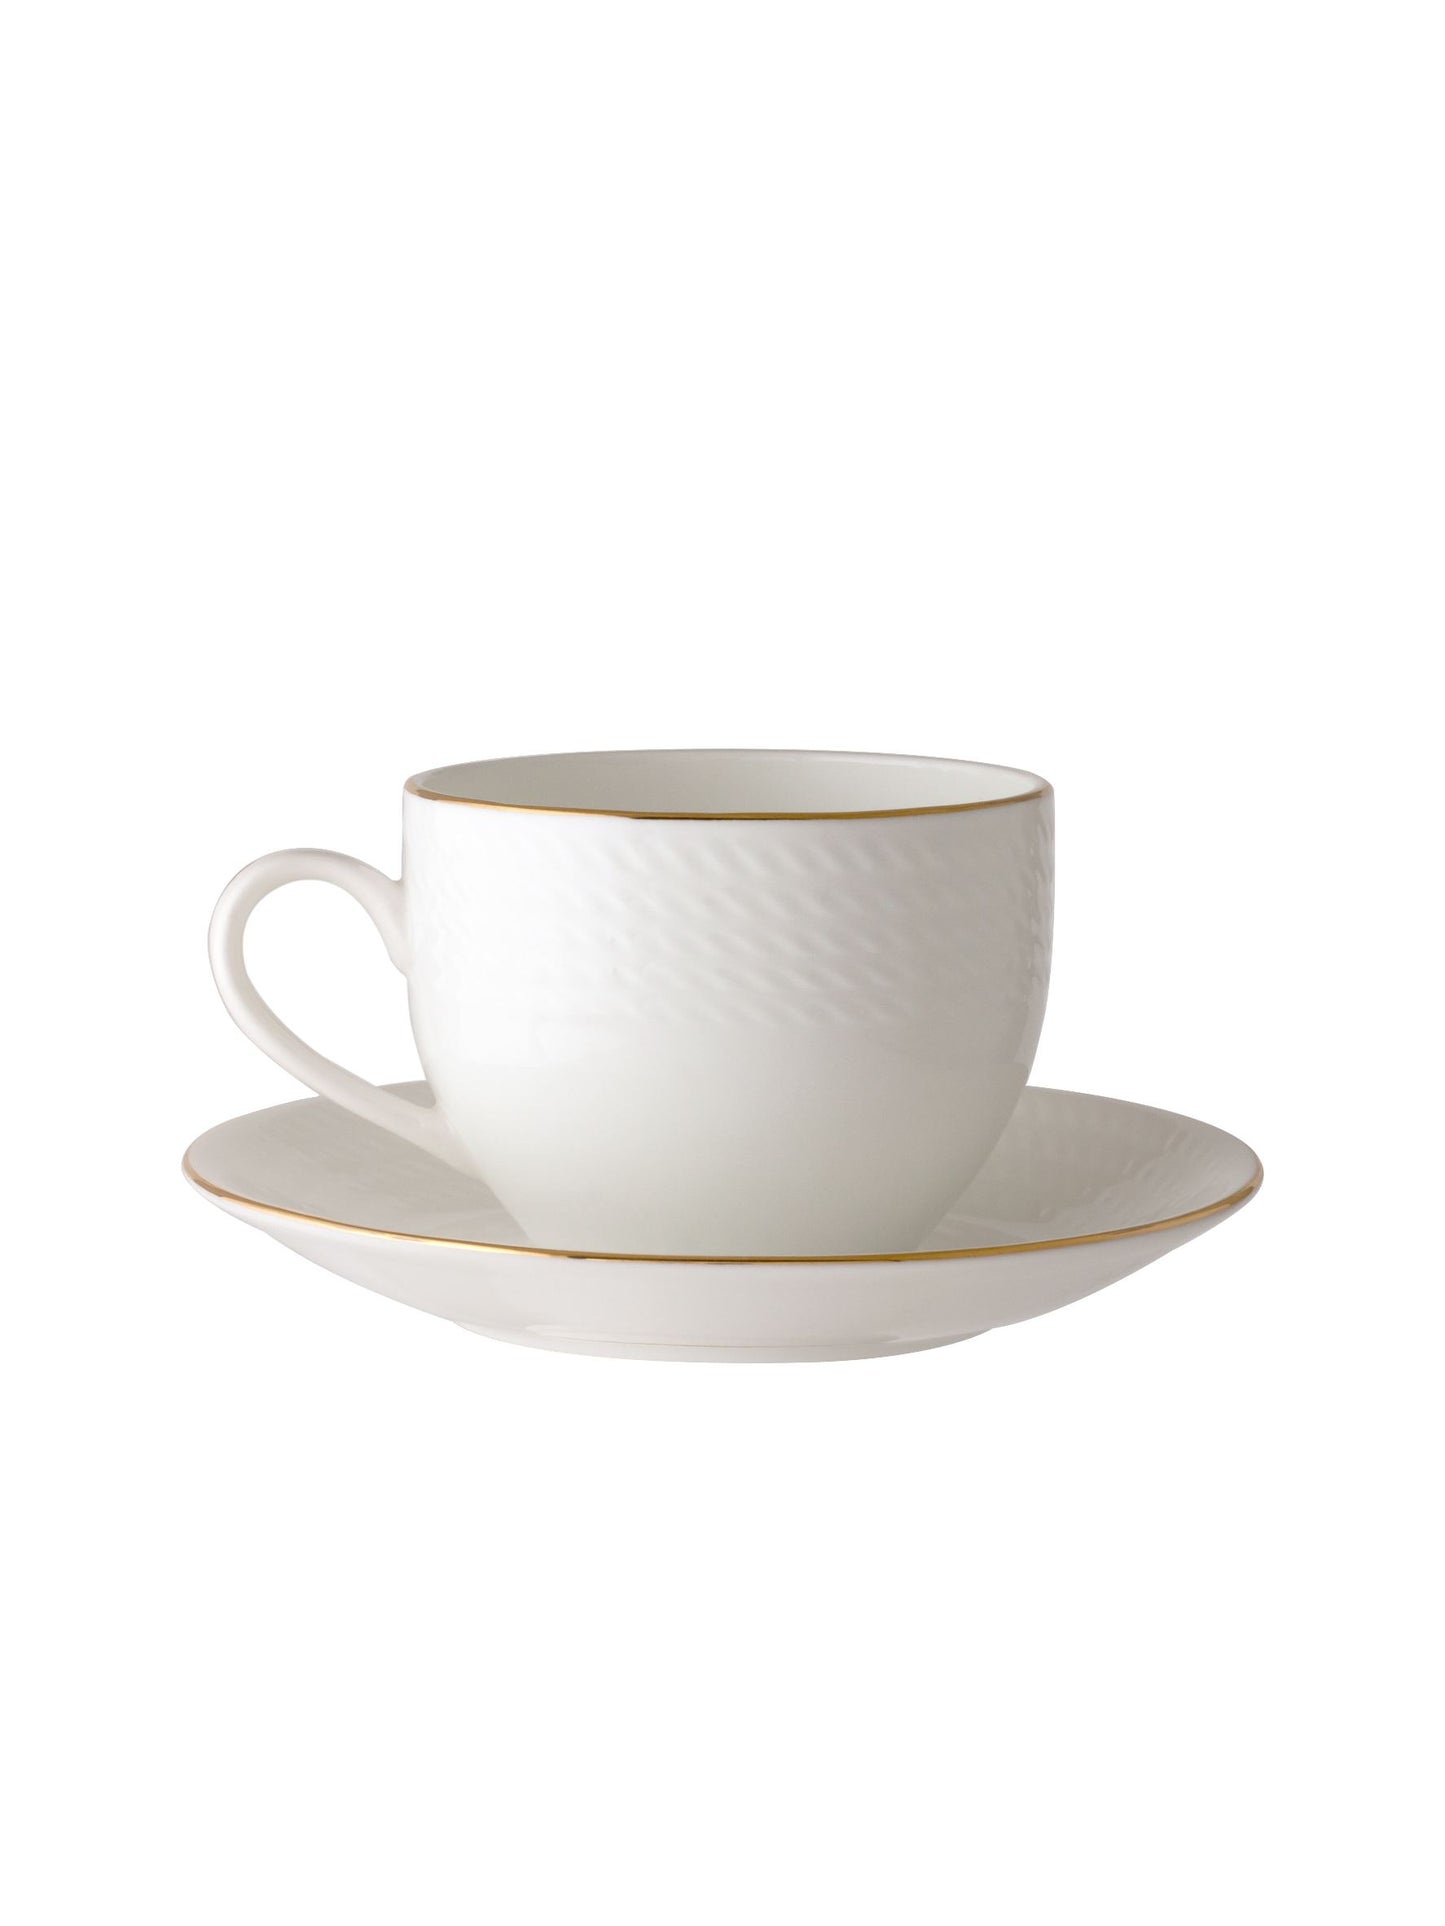 Rope Impression Cup & Saucer, 180ml, Set of 12 (6 Cups + 6 Saucers) (1101)